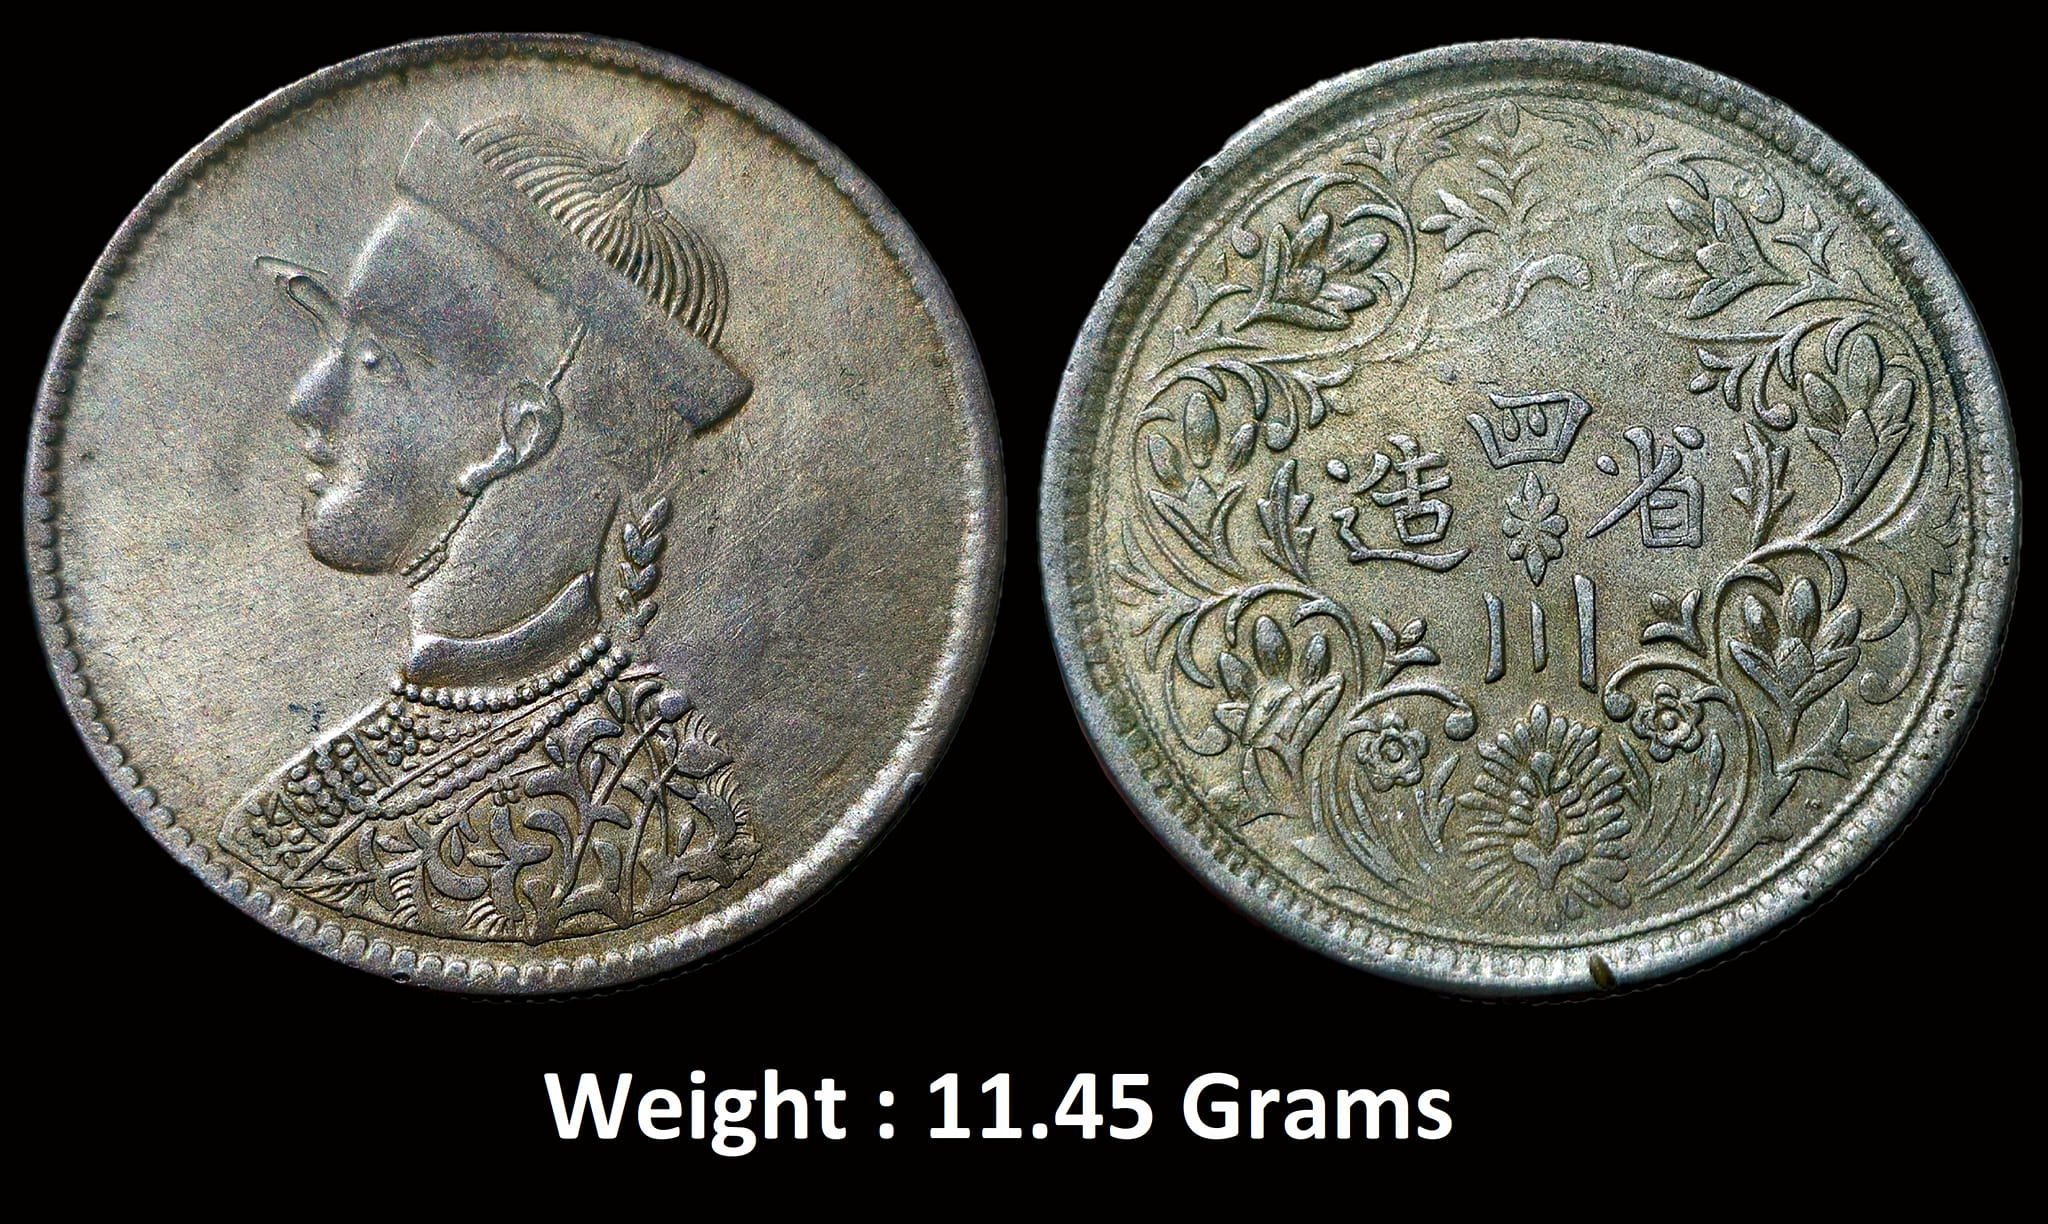 Tibet, Silver rupee, ND (1911-1916 AD), KM Y3.2, Obv: Small portraits bust of King with collar. Rev: Four Chinese ideograms read top to bottom, right to left with vertical rosette in center, all surrounded by flower wreath.
Nearly extremely fine, Very rare.
Weight : 11.45 Grams